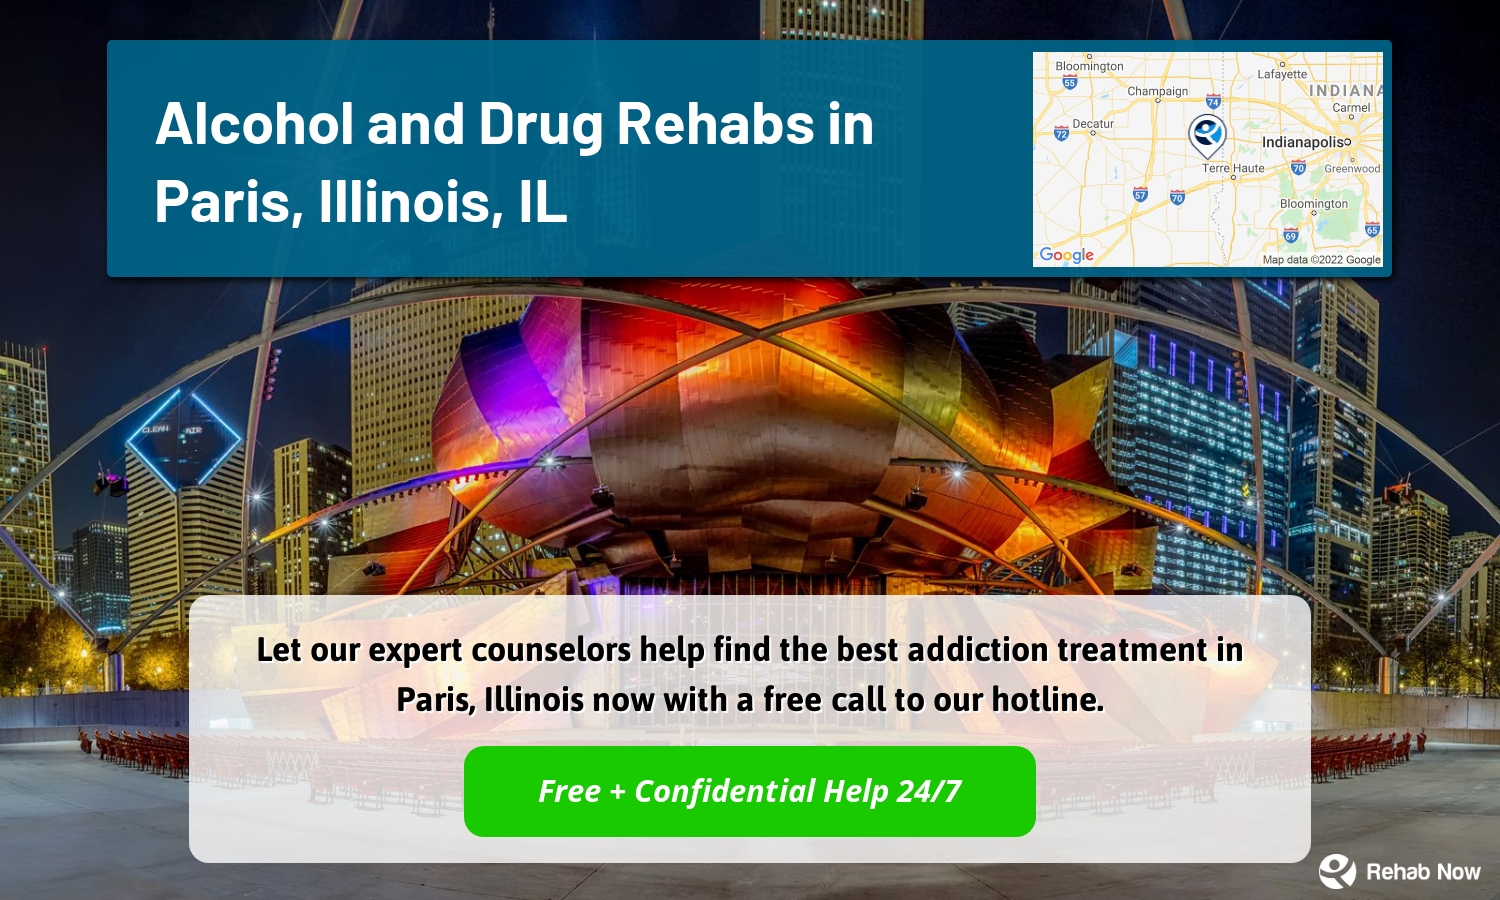 Let our expert counselors help find the best addiction treatment in Paris, Illinois now with a free call to our hotline.